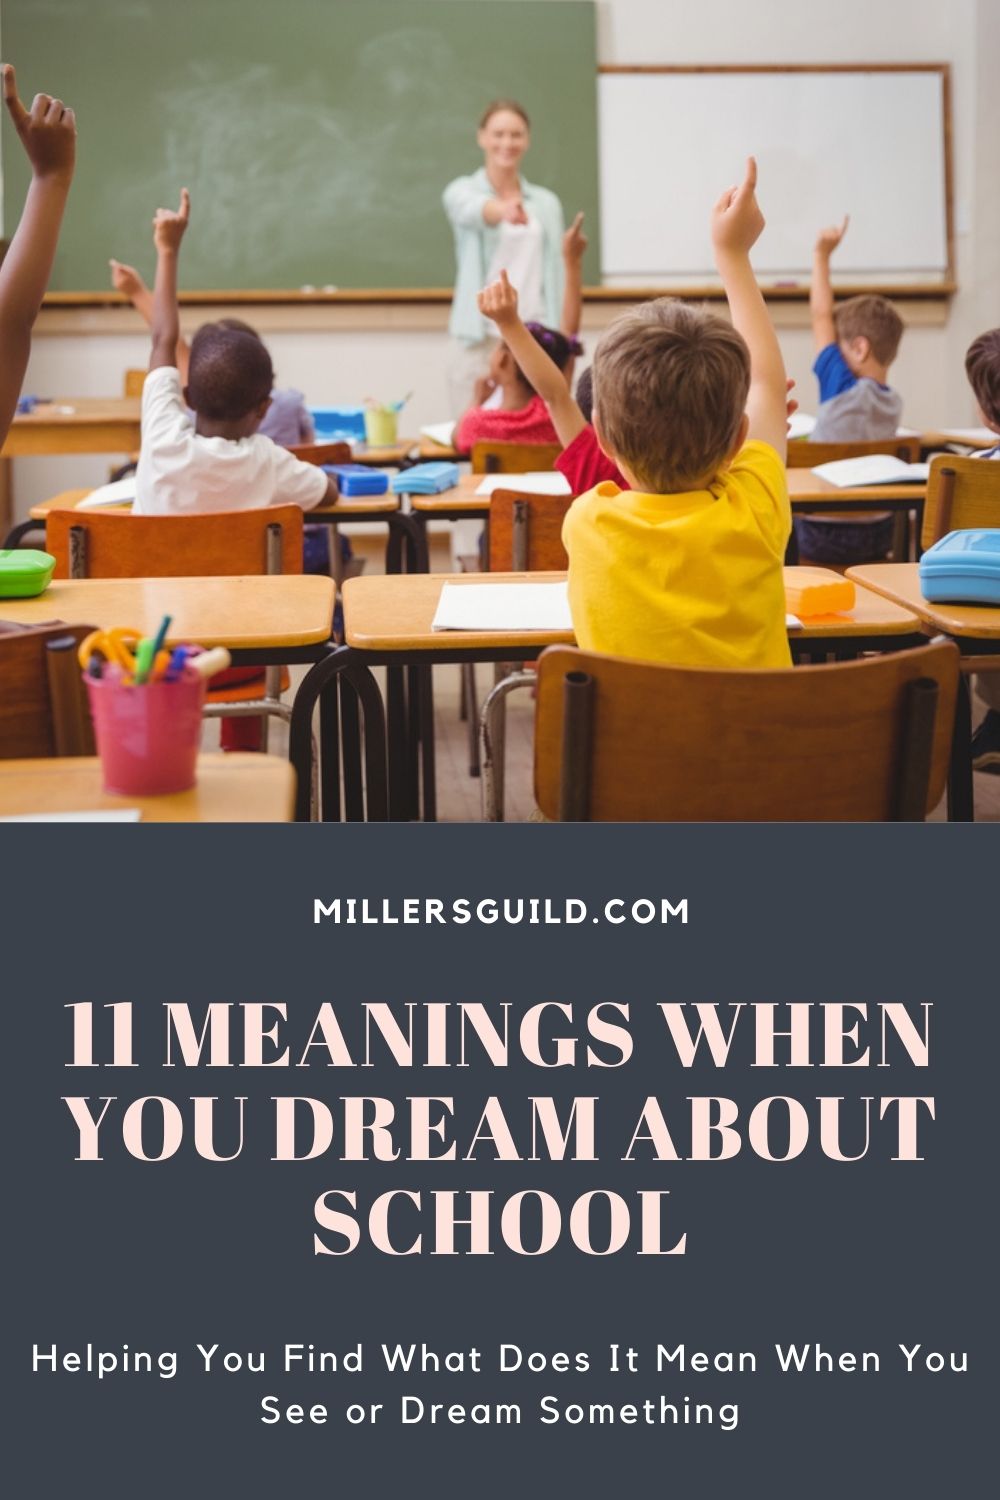 11 Meanings When You Dream about School